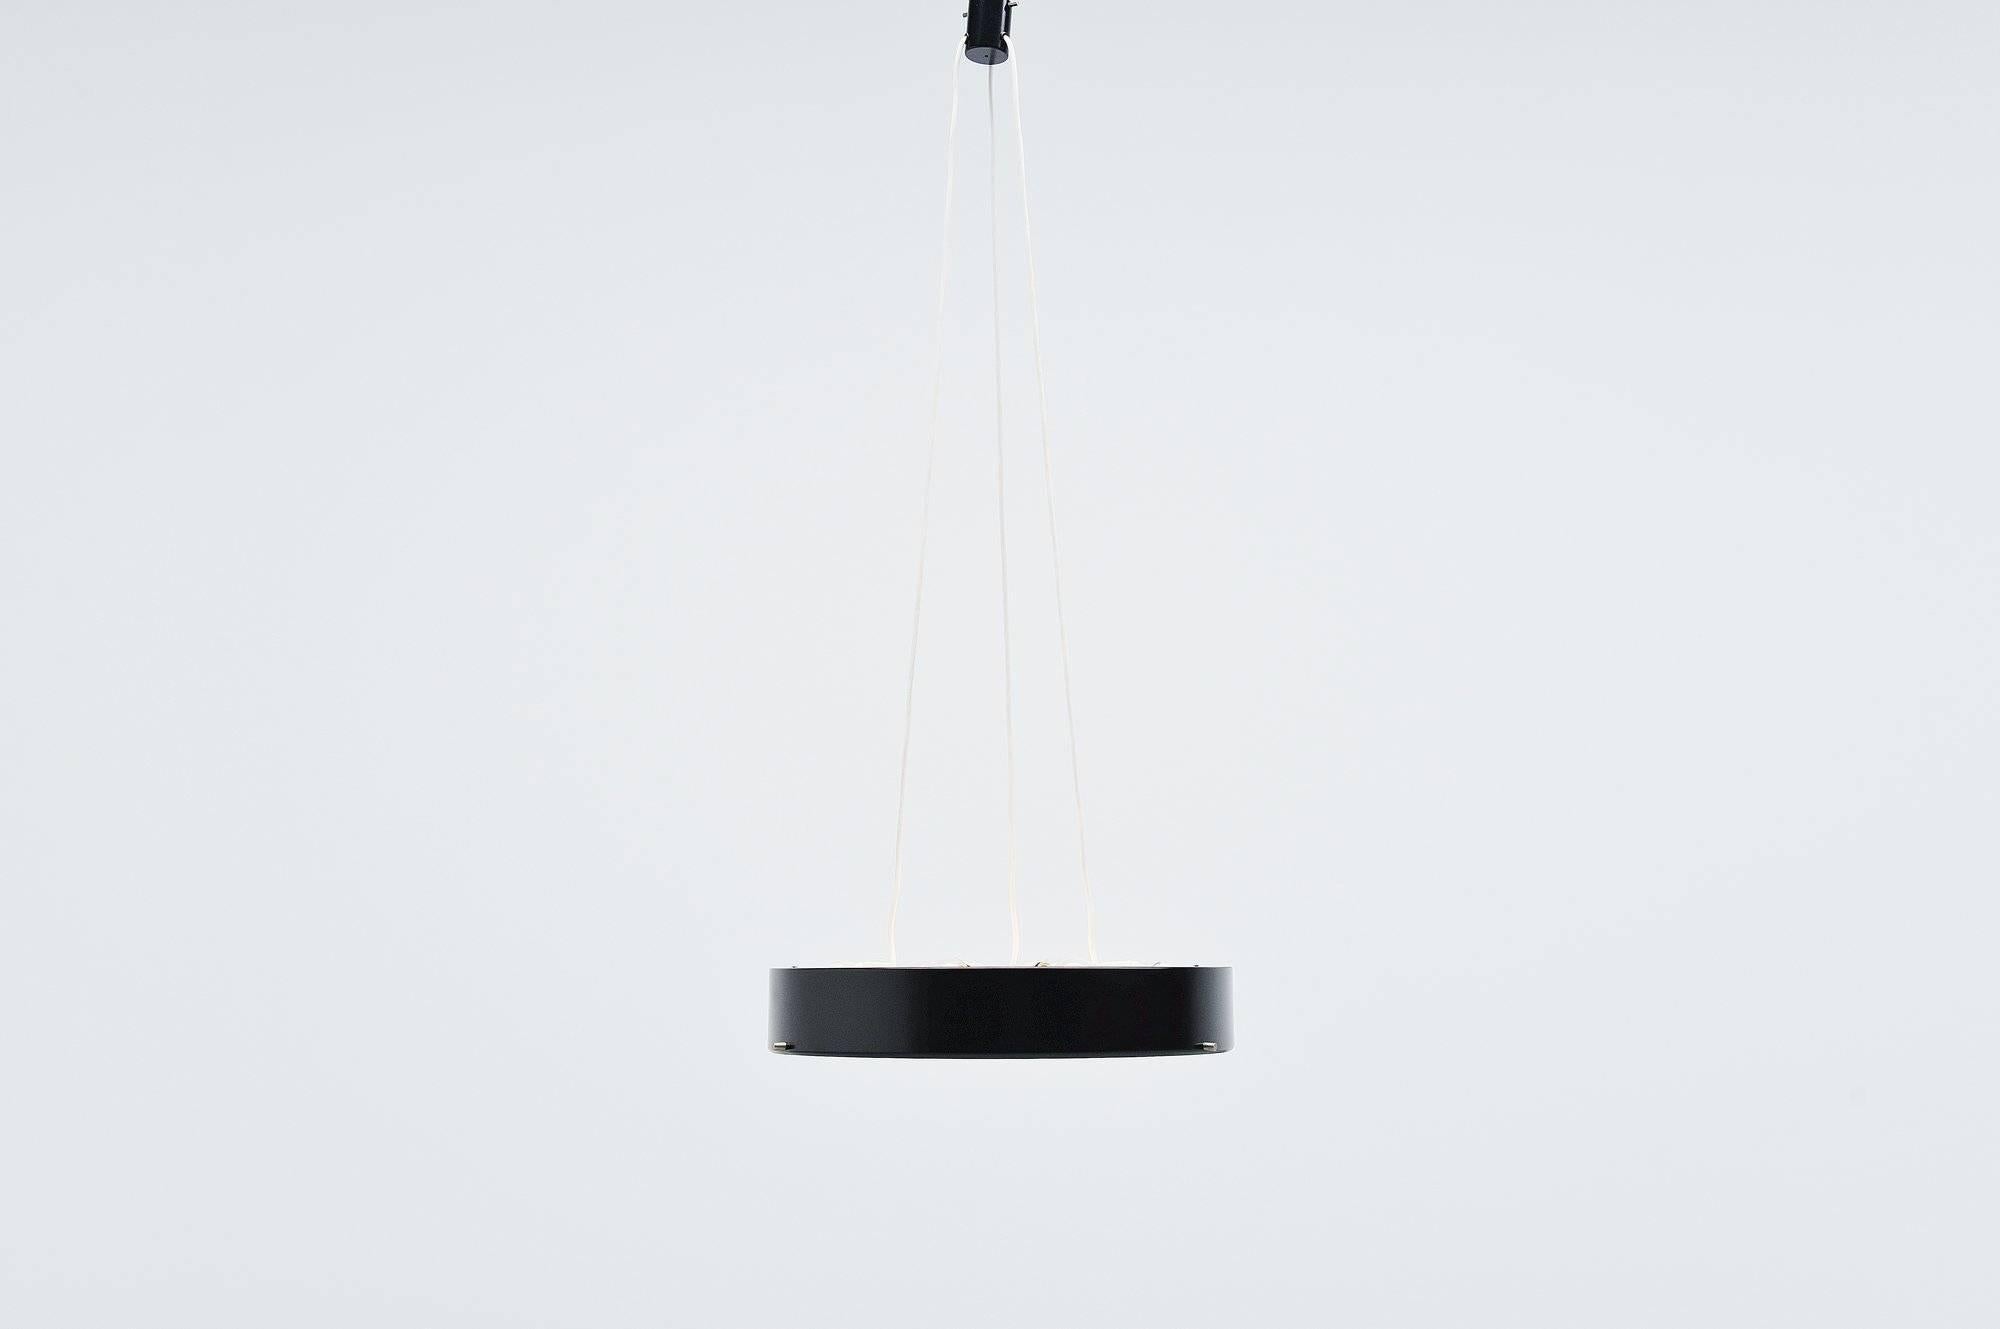 Nice large minimalist ceiling lamp model 288 designed by Bruno Gatta for Stilnovo, Italy 1959. This is for a very nice modernist shaped ceiling pendant lamp with a black lacquered aluminium shade, and a large white opaline glass diffuser shade. The